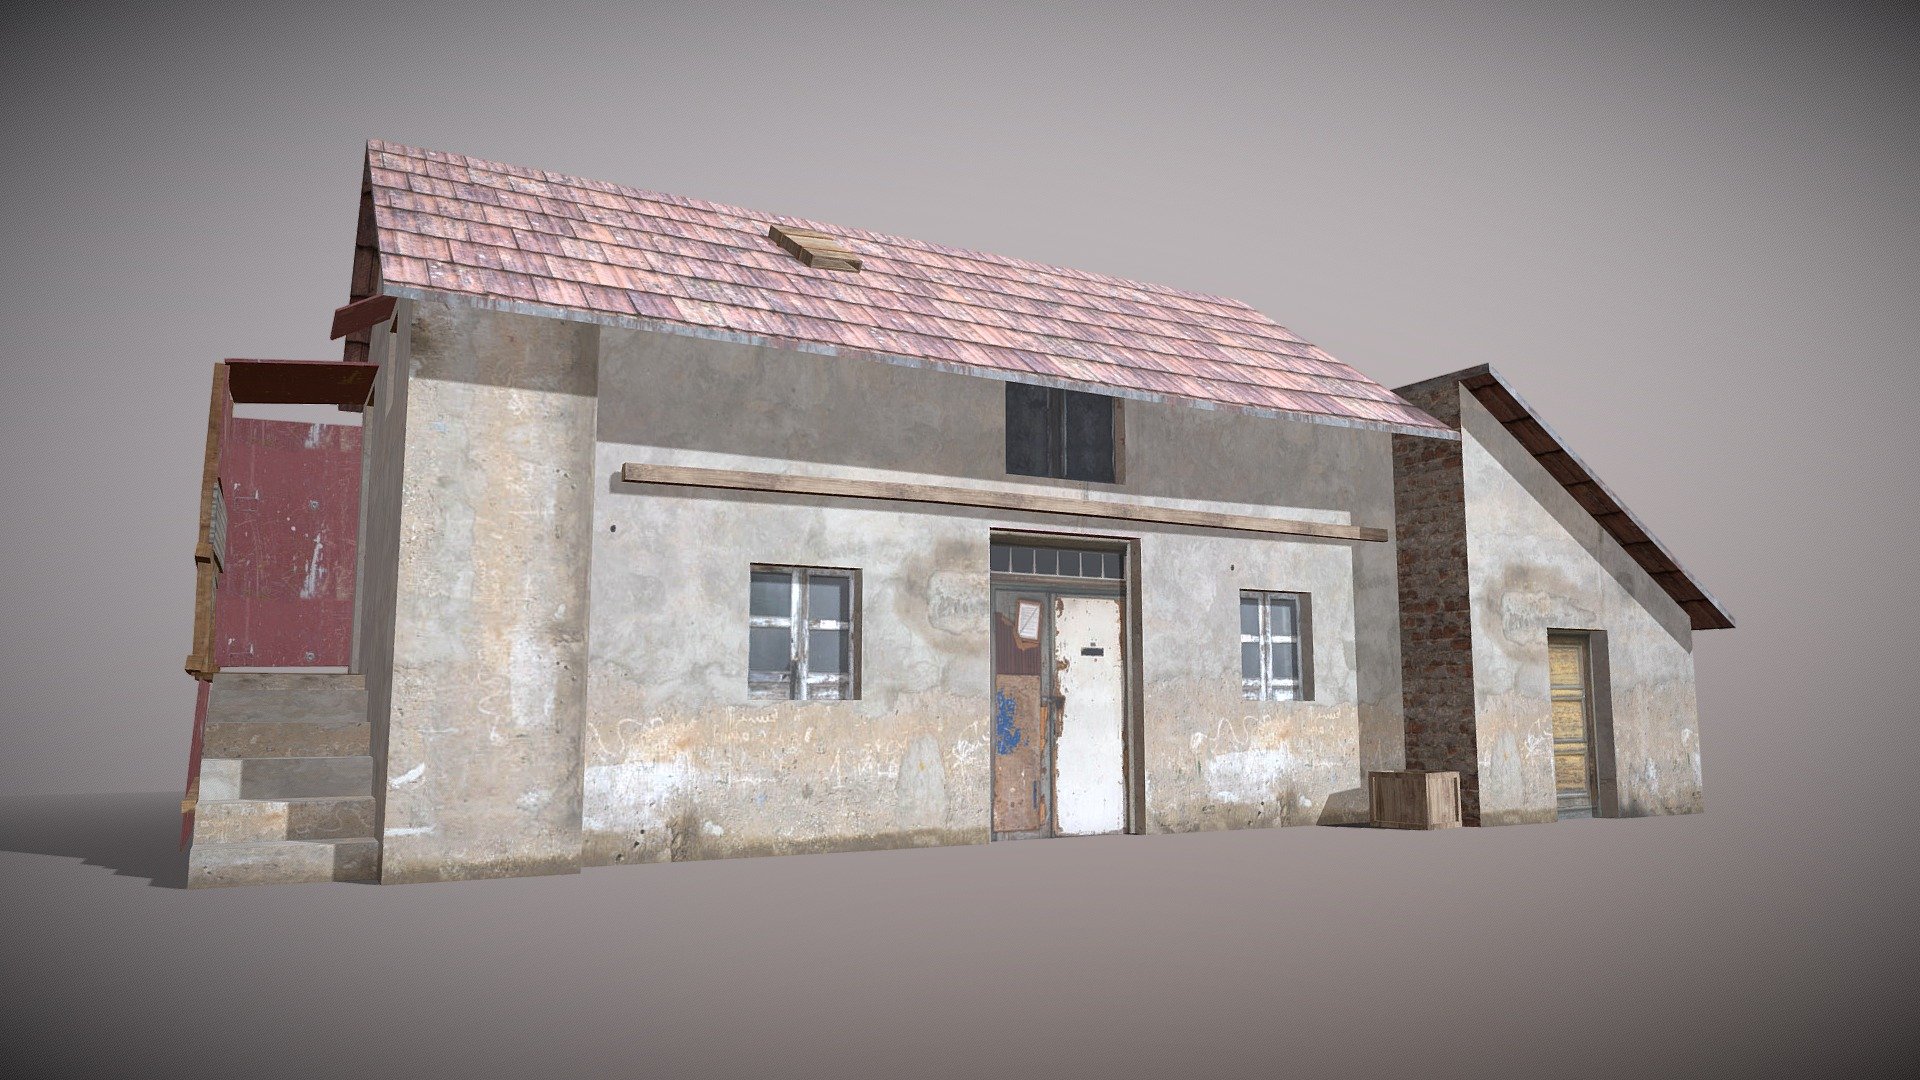 Game Ready 3D Old House /slum Native file format 3Ds max 2022
Other formats Blender 4.0 ,FBX, OBJ, 
All formats include materials &amp; textures

Polygons- 544 Vertices - 603

Materials &amp; textures.
1 Diffuse Map 2048x2048 - Slum x1 - Buy Royalty Free 3D model by 3DRK (@3DRK98) 3d model